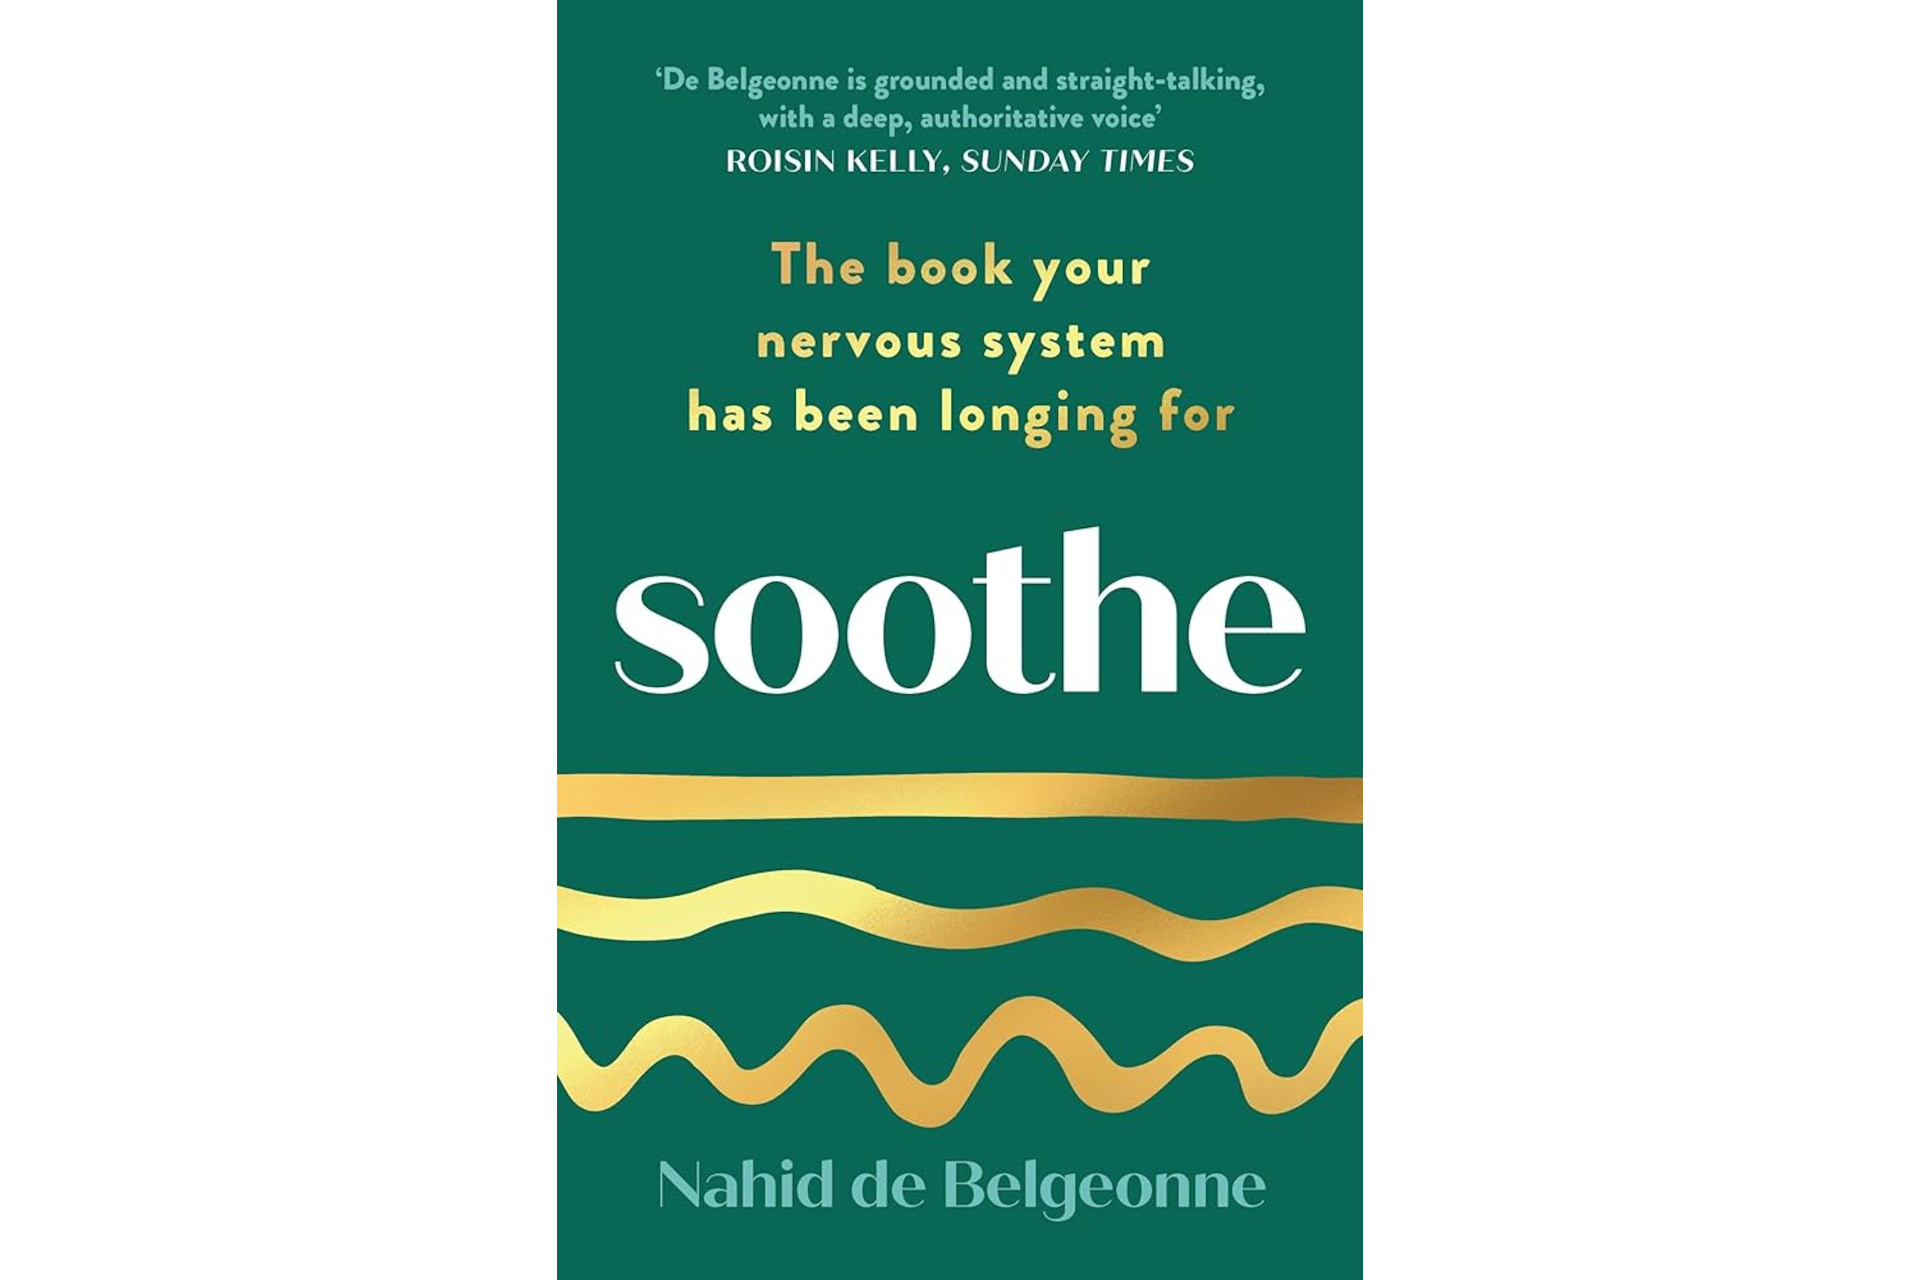 Green book cover for Soothe